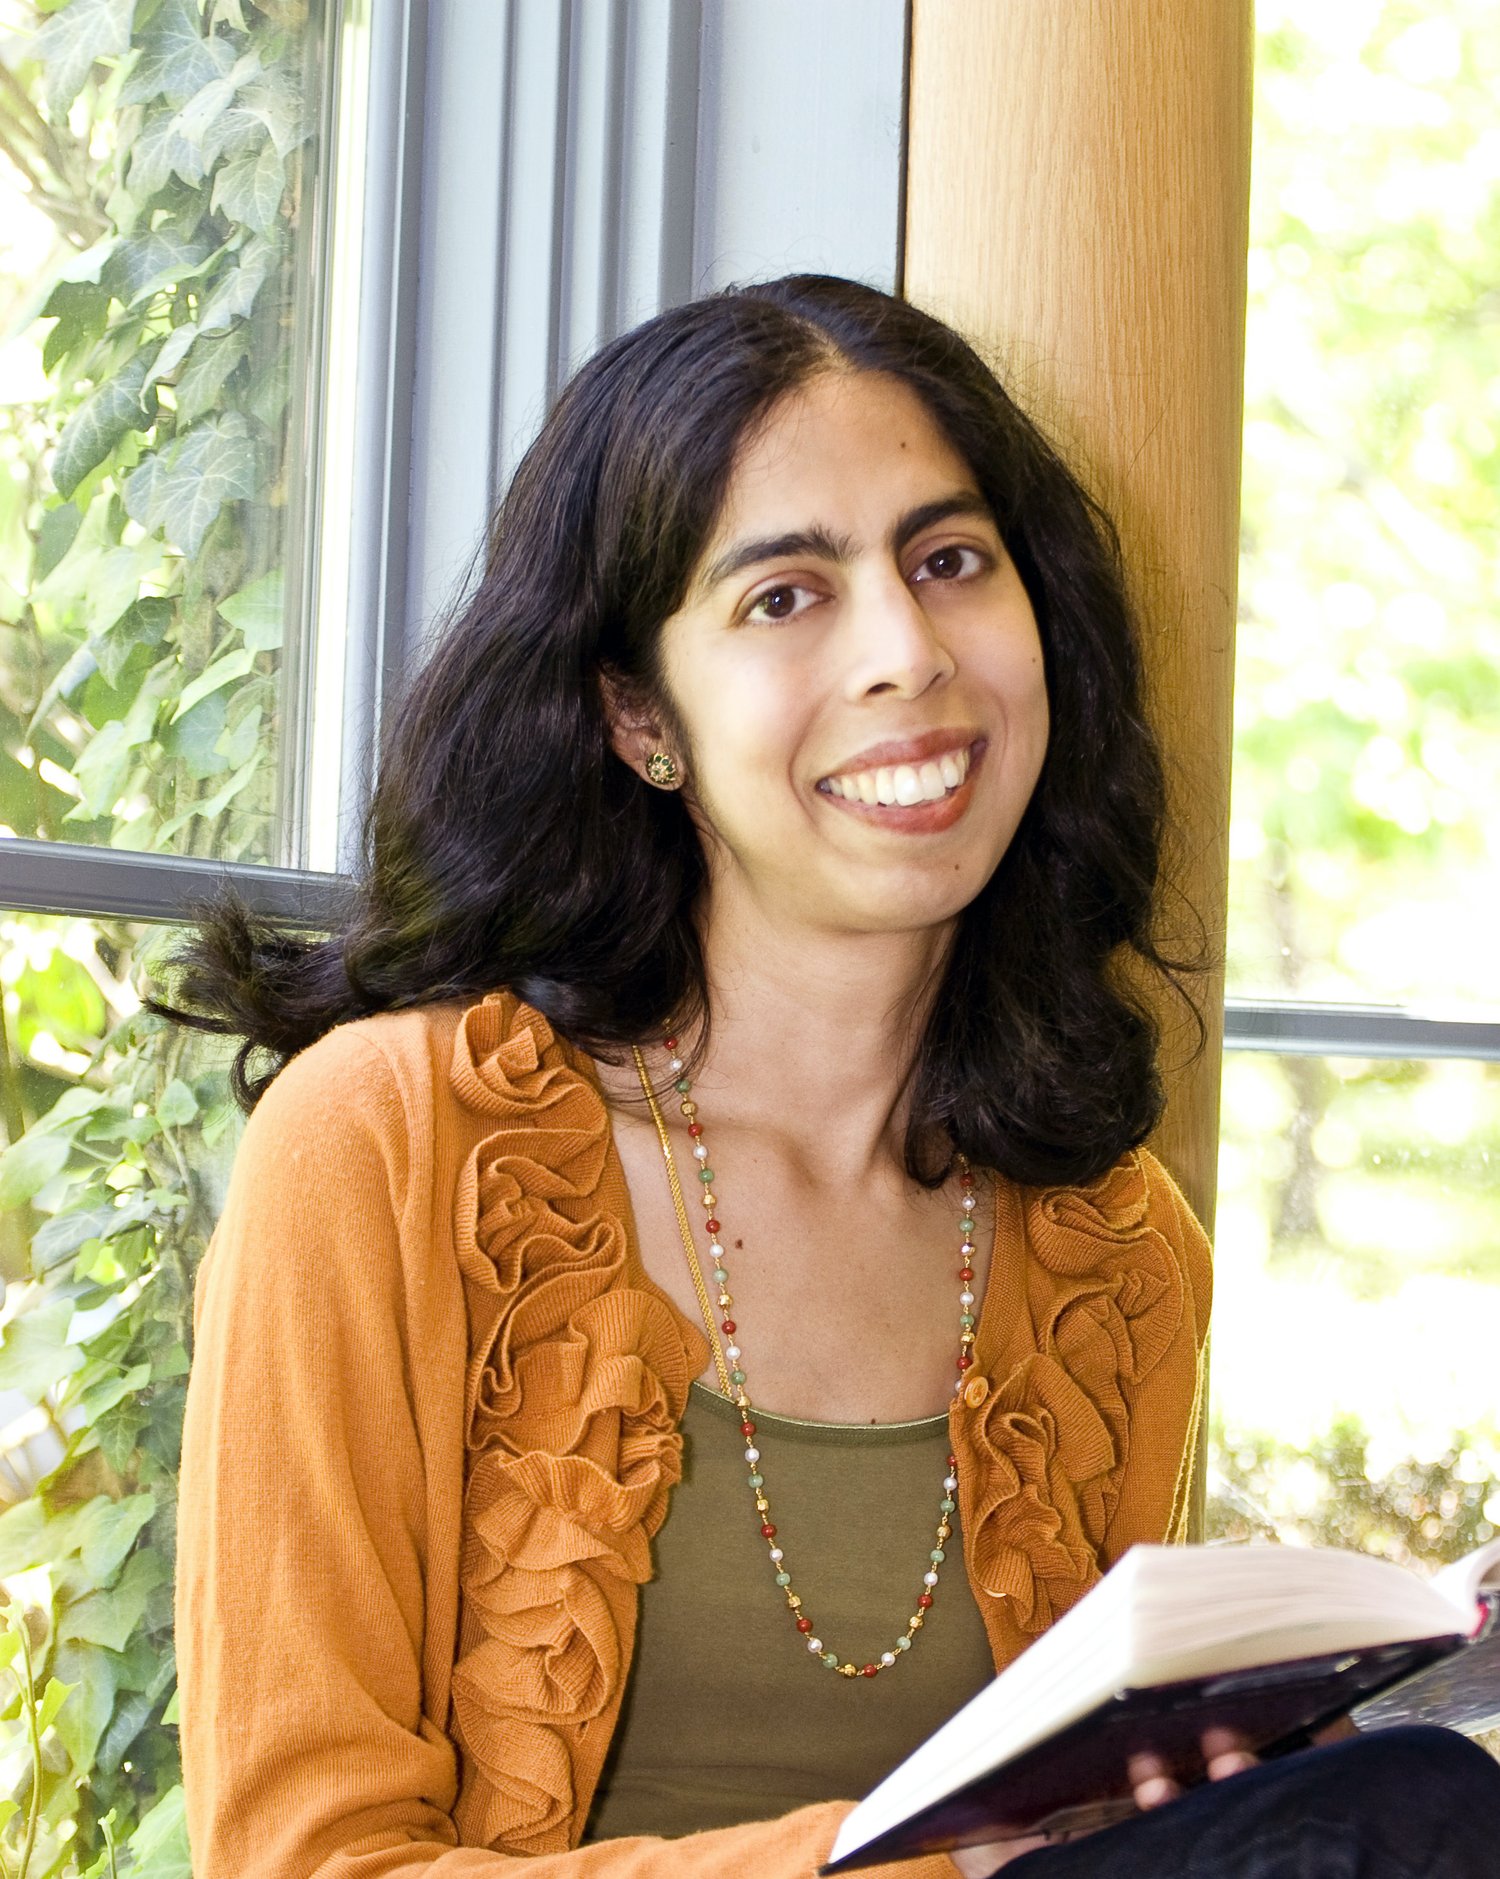 Ep. 89: On the craft of children's literature with author and teacher Sheela Chari